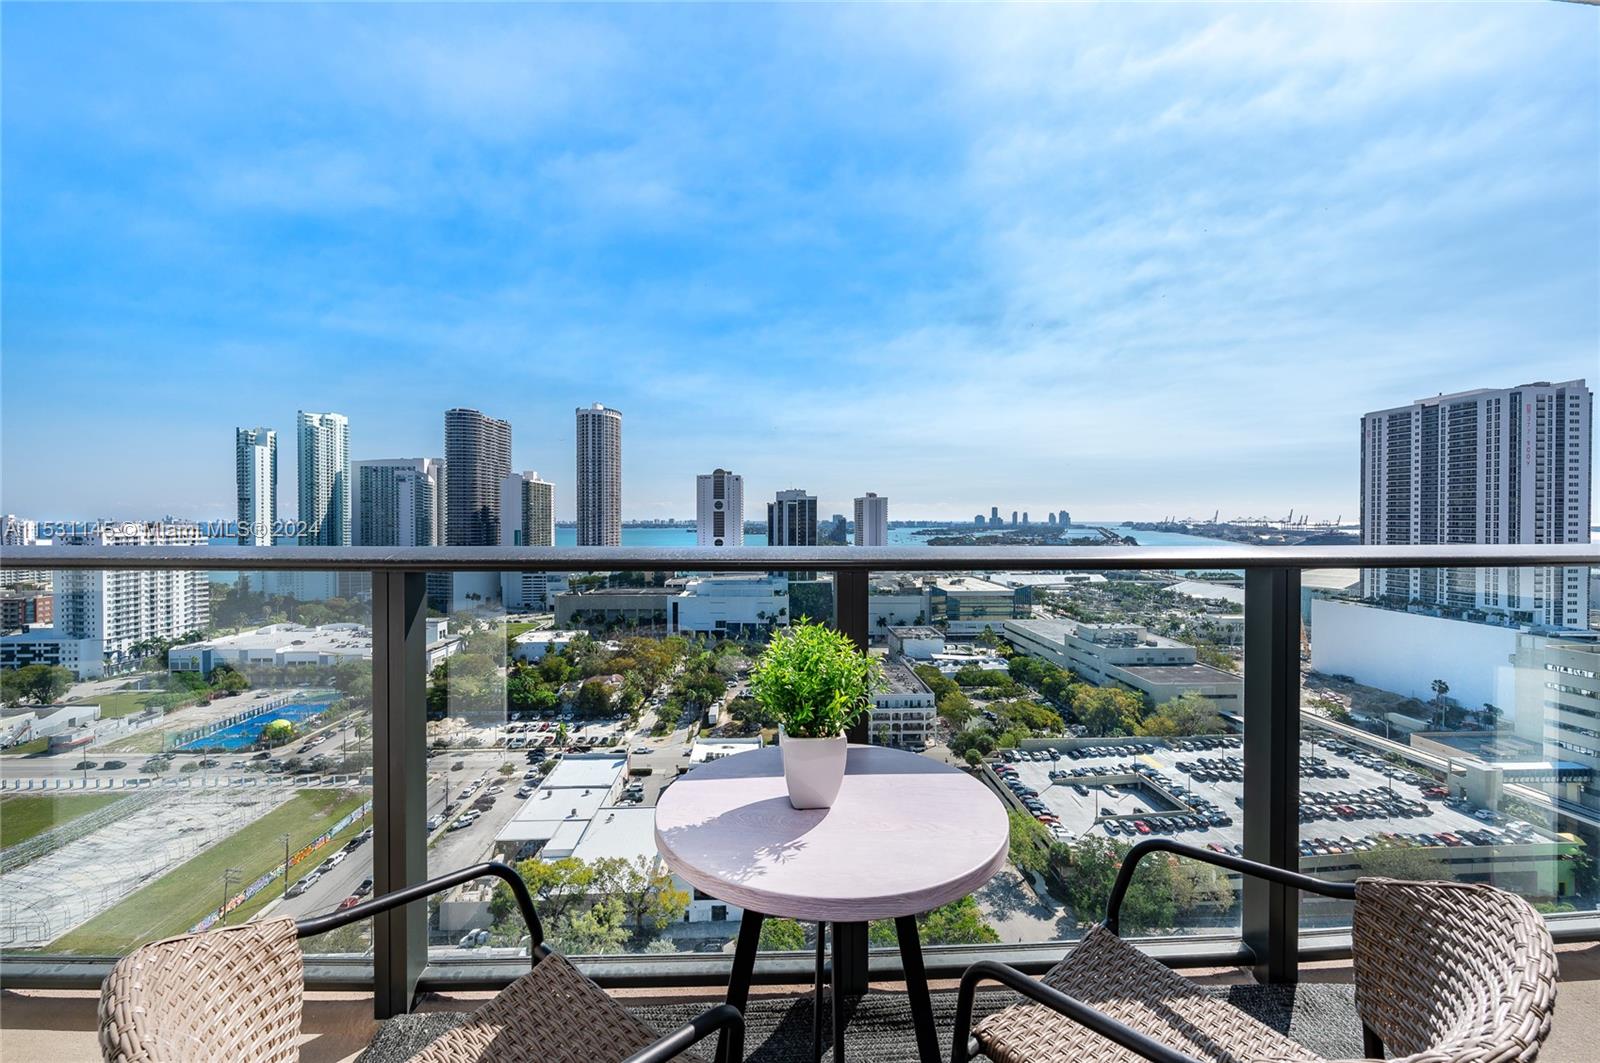 Located in the here of the Arts & Entertainment District of Miami, this HIGH FLOOR TURN KEY FULLY FURNISHED unit boasts spectacular view of Biscayne Bay, Miami Beach, Port of Miami, and the Miami City Skyline.  
Residents enjoy high end amenities such as 24 hours gym w/yoga room, massage room, sauna, racket/volleyball courts, 2 pools, rooftop solarium, children playroom, business center, and social room. 24 hours security/concierge service. Enjoy the Arts & Entertainment District, Convenient access to Miami International Airport, Miami Beach, Brickell, Downtown, Wynwood, & Miami Design District. The MetroMover Station in the neighborhood allows easy access to the airport, shops, museums, restaurants, & entertainment.
Unit available to rent for maximum of 6 months or 3 month minimum.